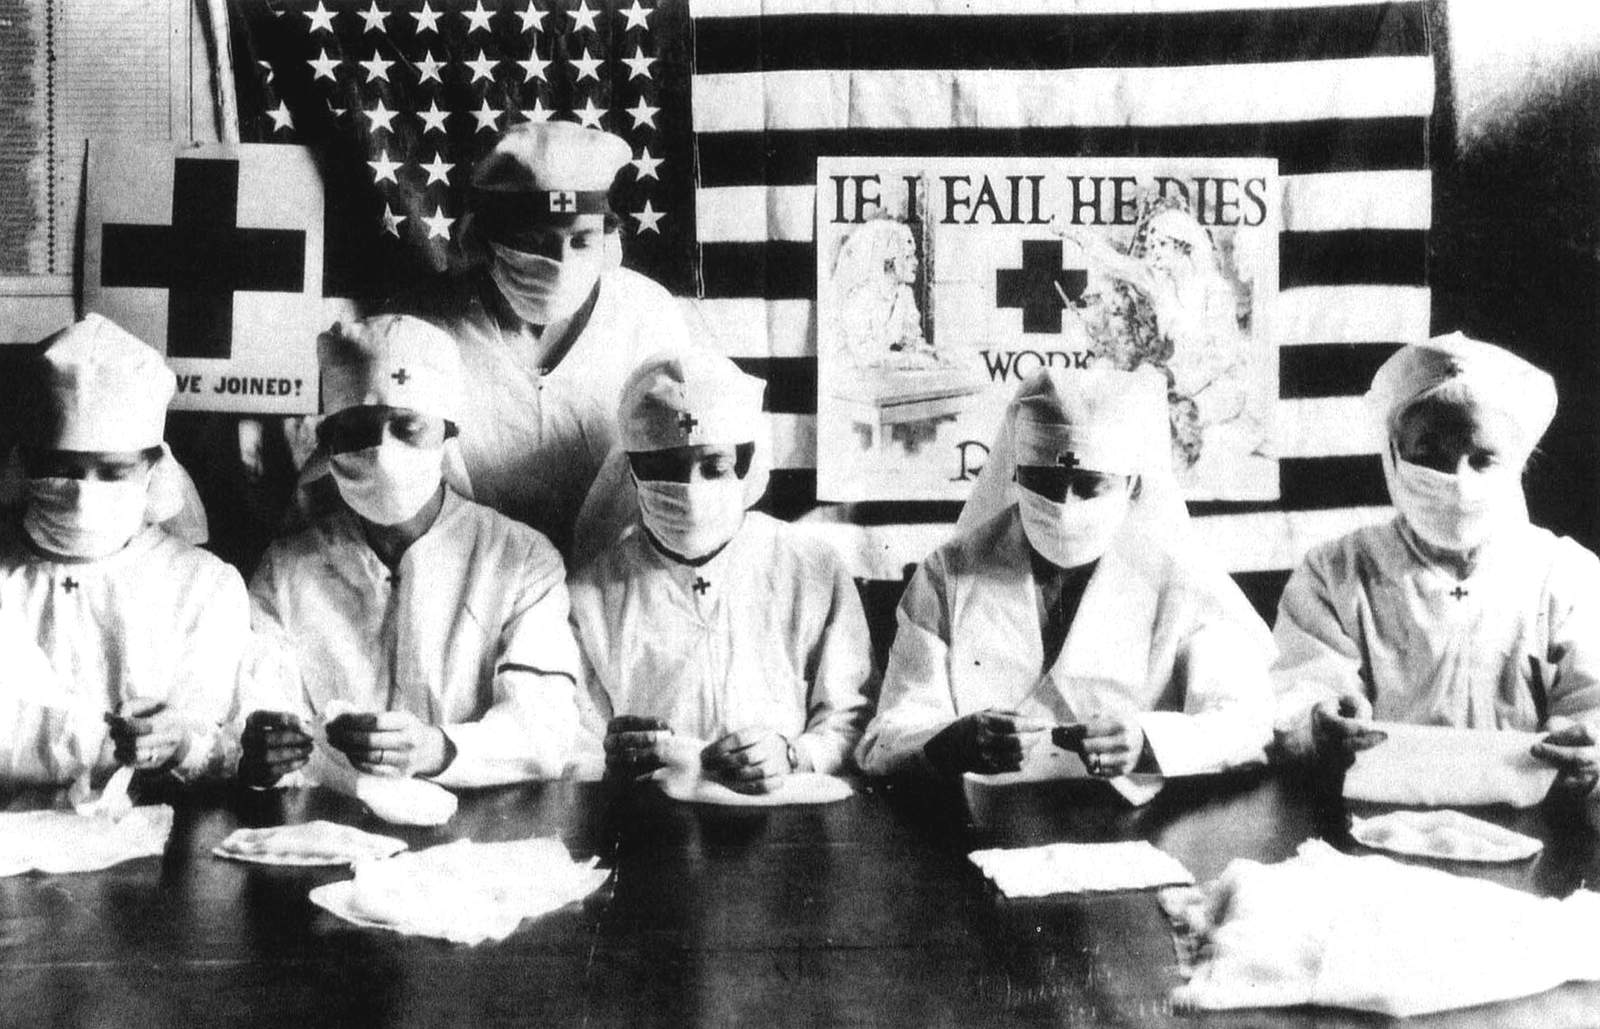 FILE PHOTO - JANUARY 27:  Red Cross volunteers fighting against the spanish flu epidemy in United States in 1918  (Photo by Apic/Getty Images)